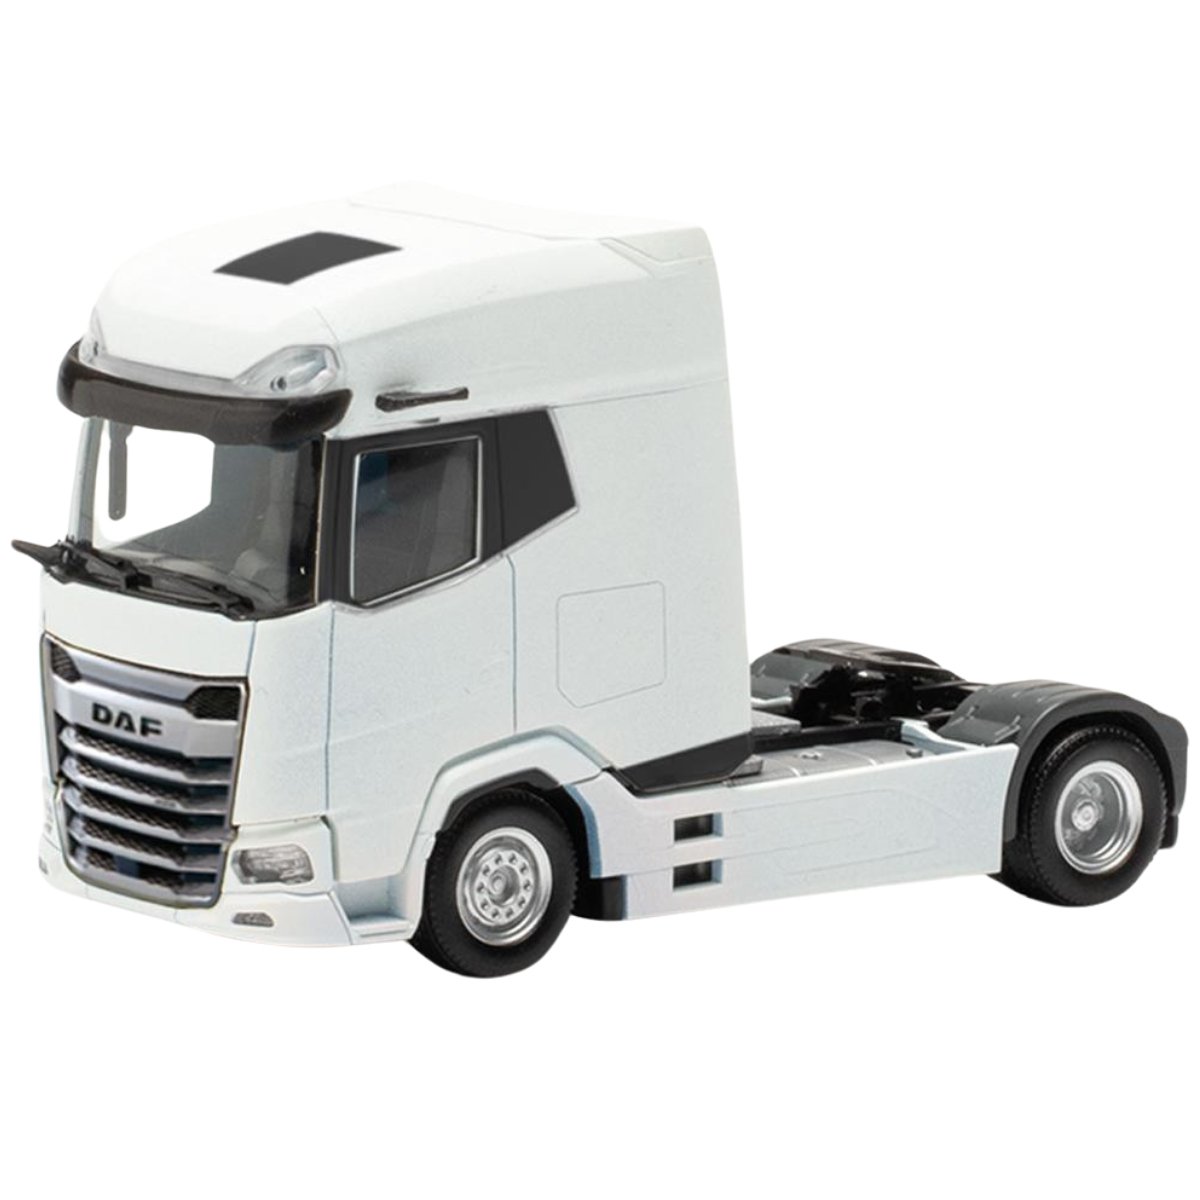 Herpa DAF XG+ Tractor Unit White - 1:87 Scale - Phillips Hobbies